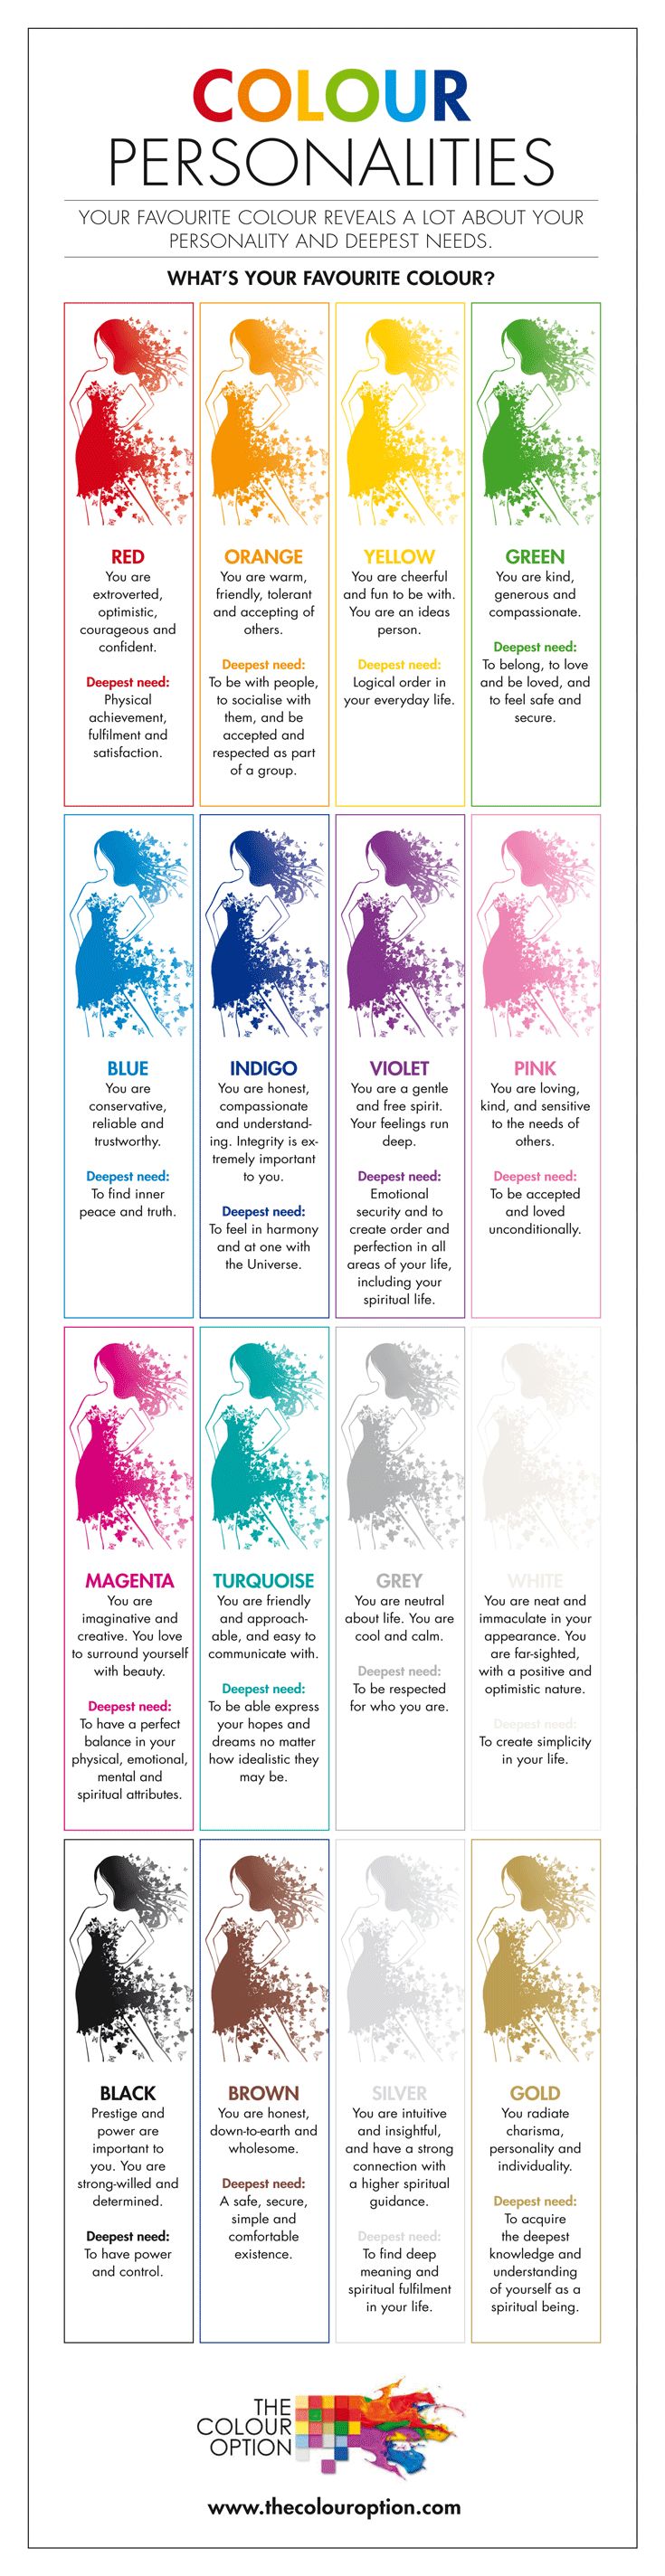 1530383460_884_Marketing-Infographic-Looking-for-a-color-personality-test-Name-your-favorite-color-and-in-seconds-y Marketing Infographic : Looking for a color personality test? Name your favorite color and in seconds, y...